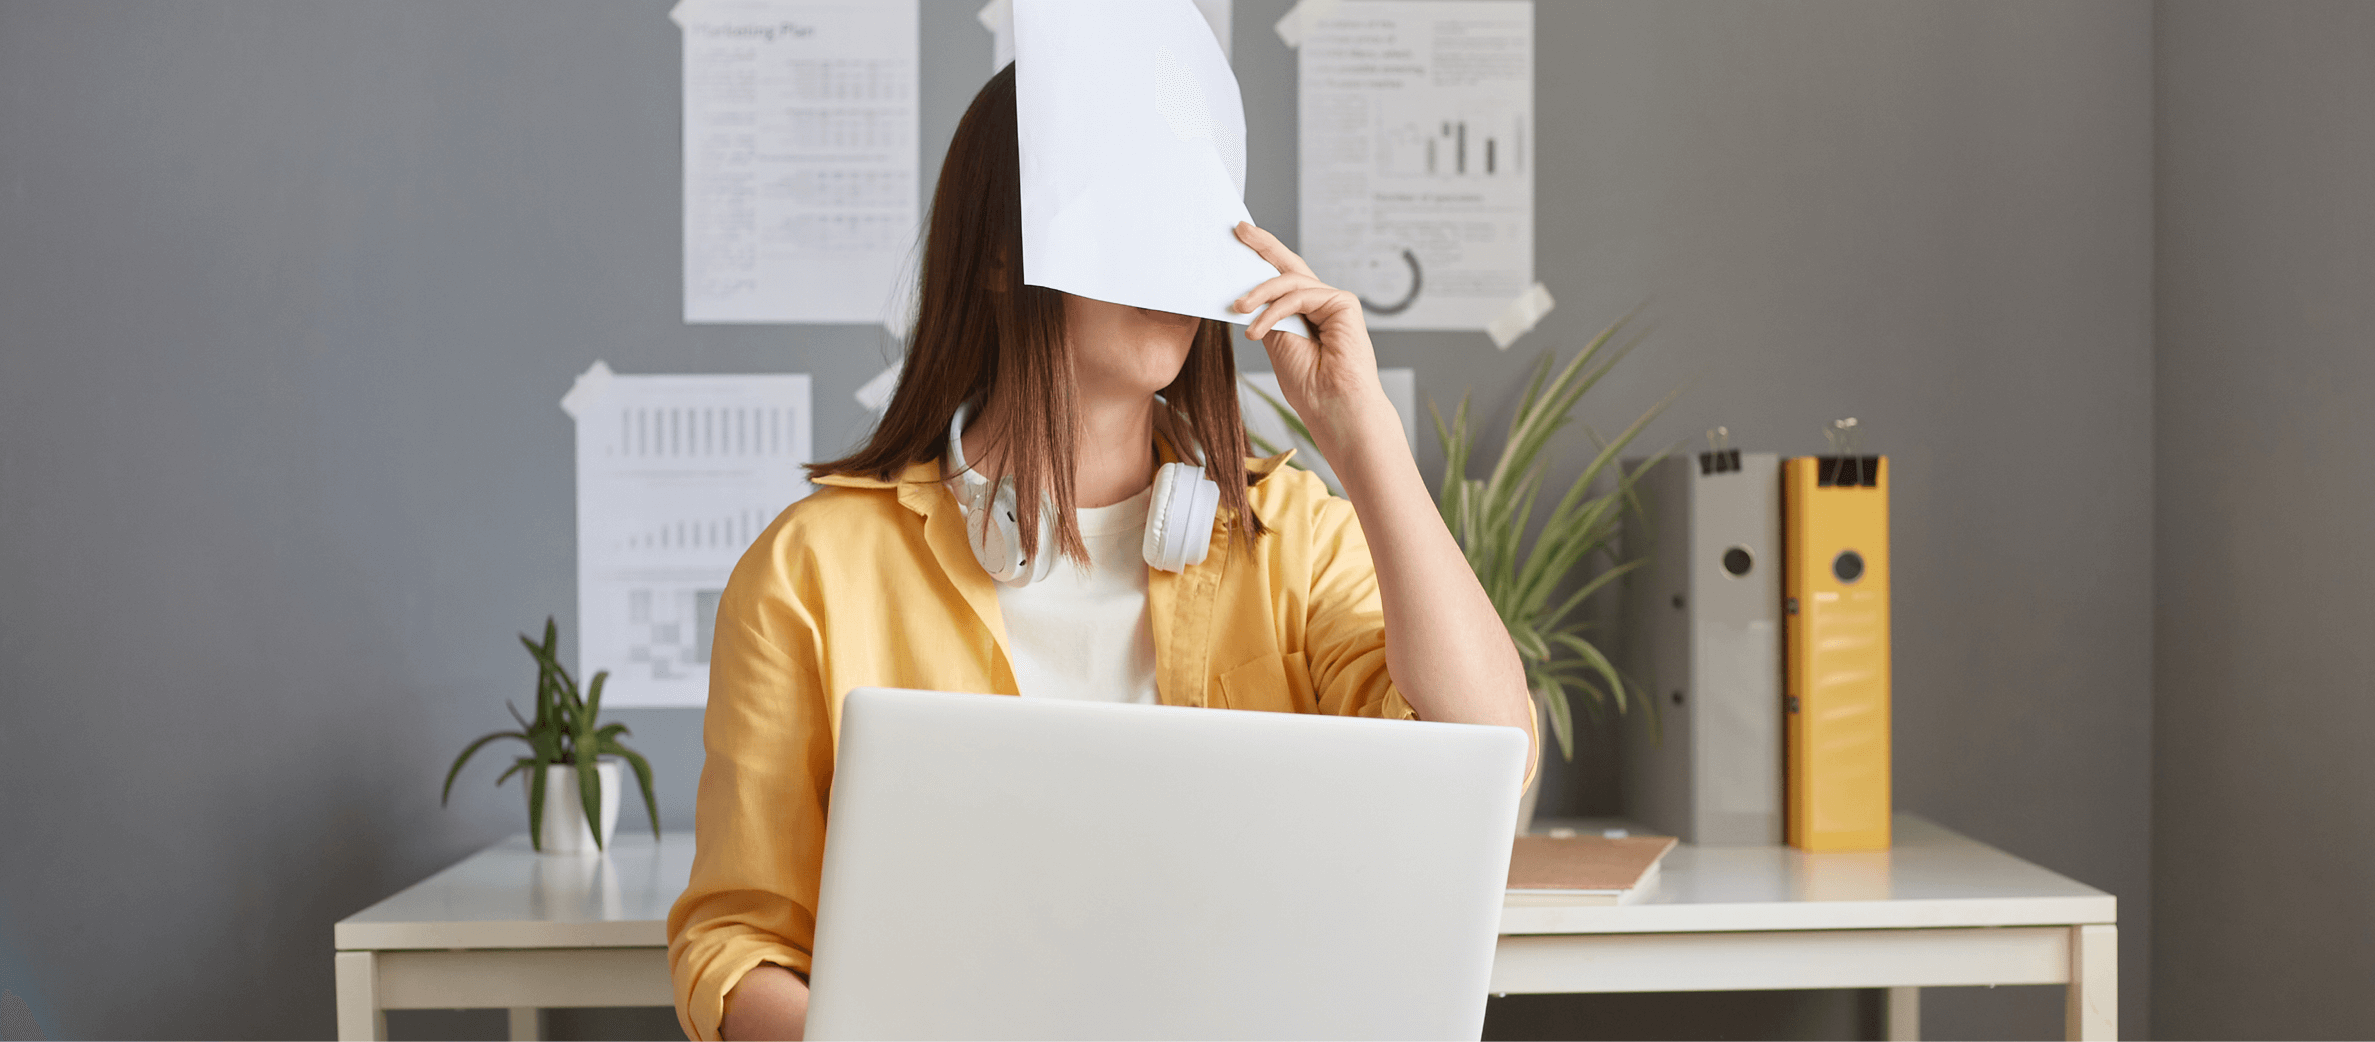 10 Oops Moments in Bookkeeping that Have Small Business Owners Facepalming